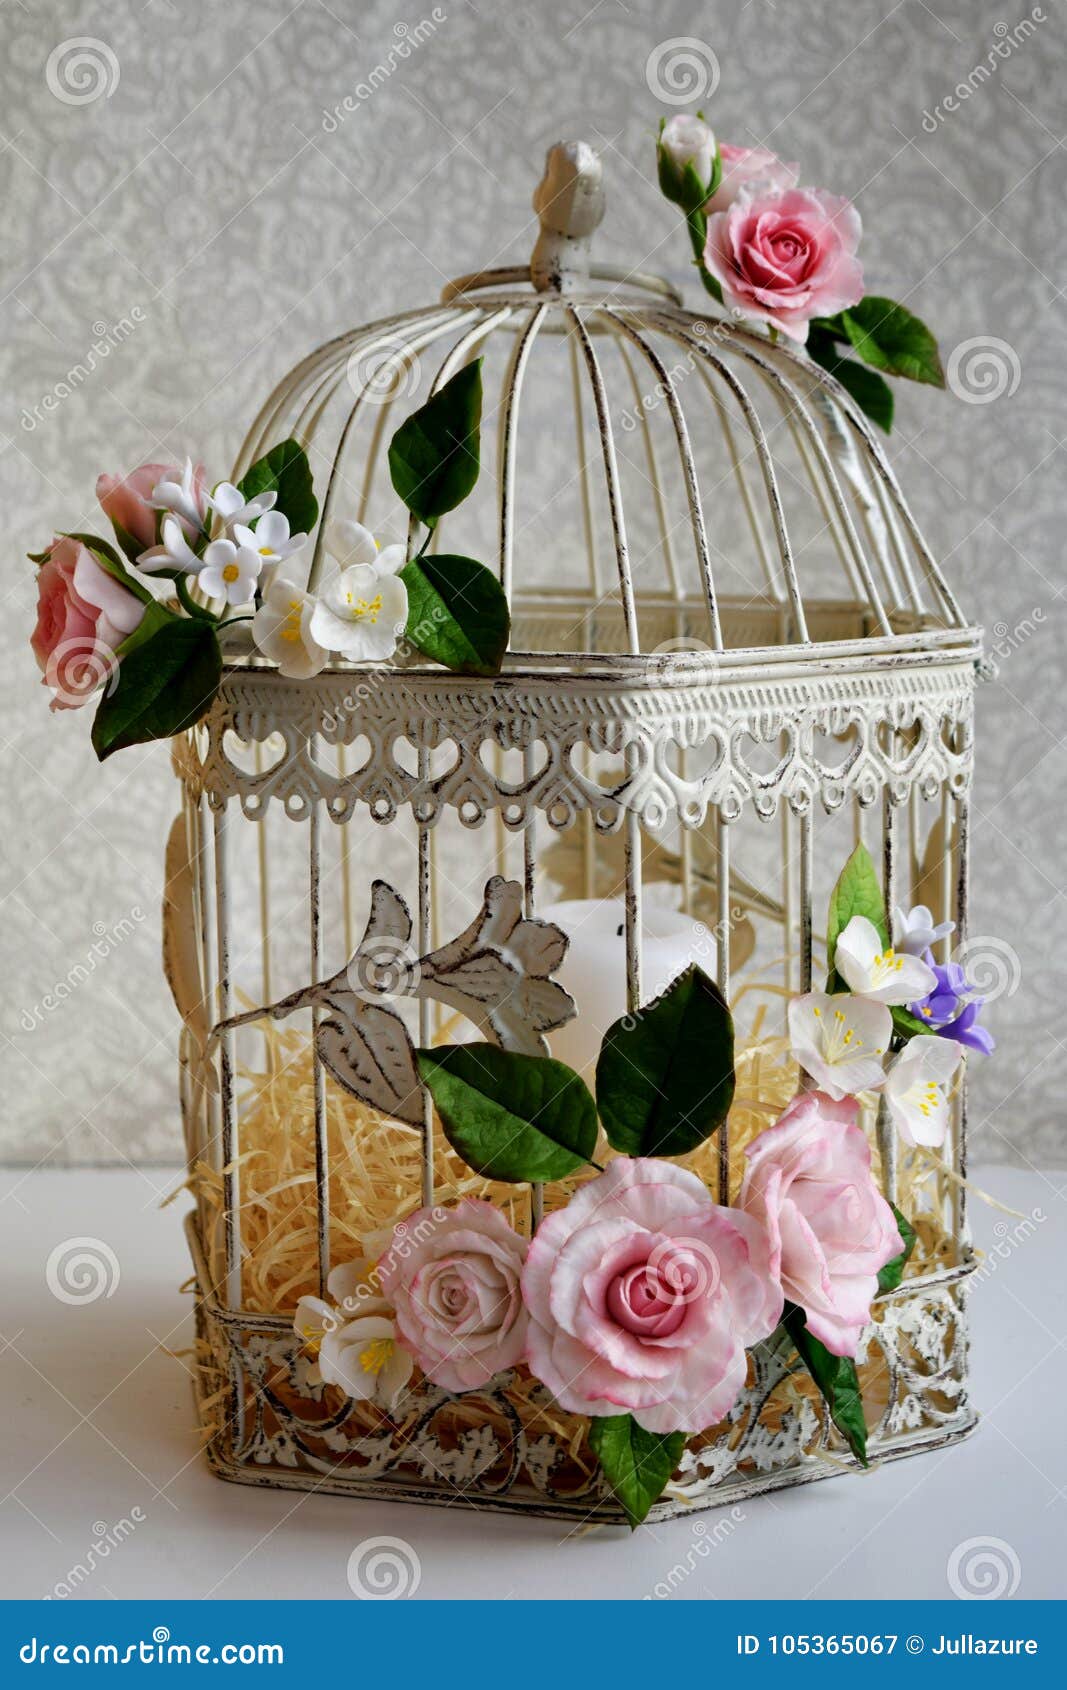 Bird Cage With Spring Blossom Flowers Wedding Decorations Stock